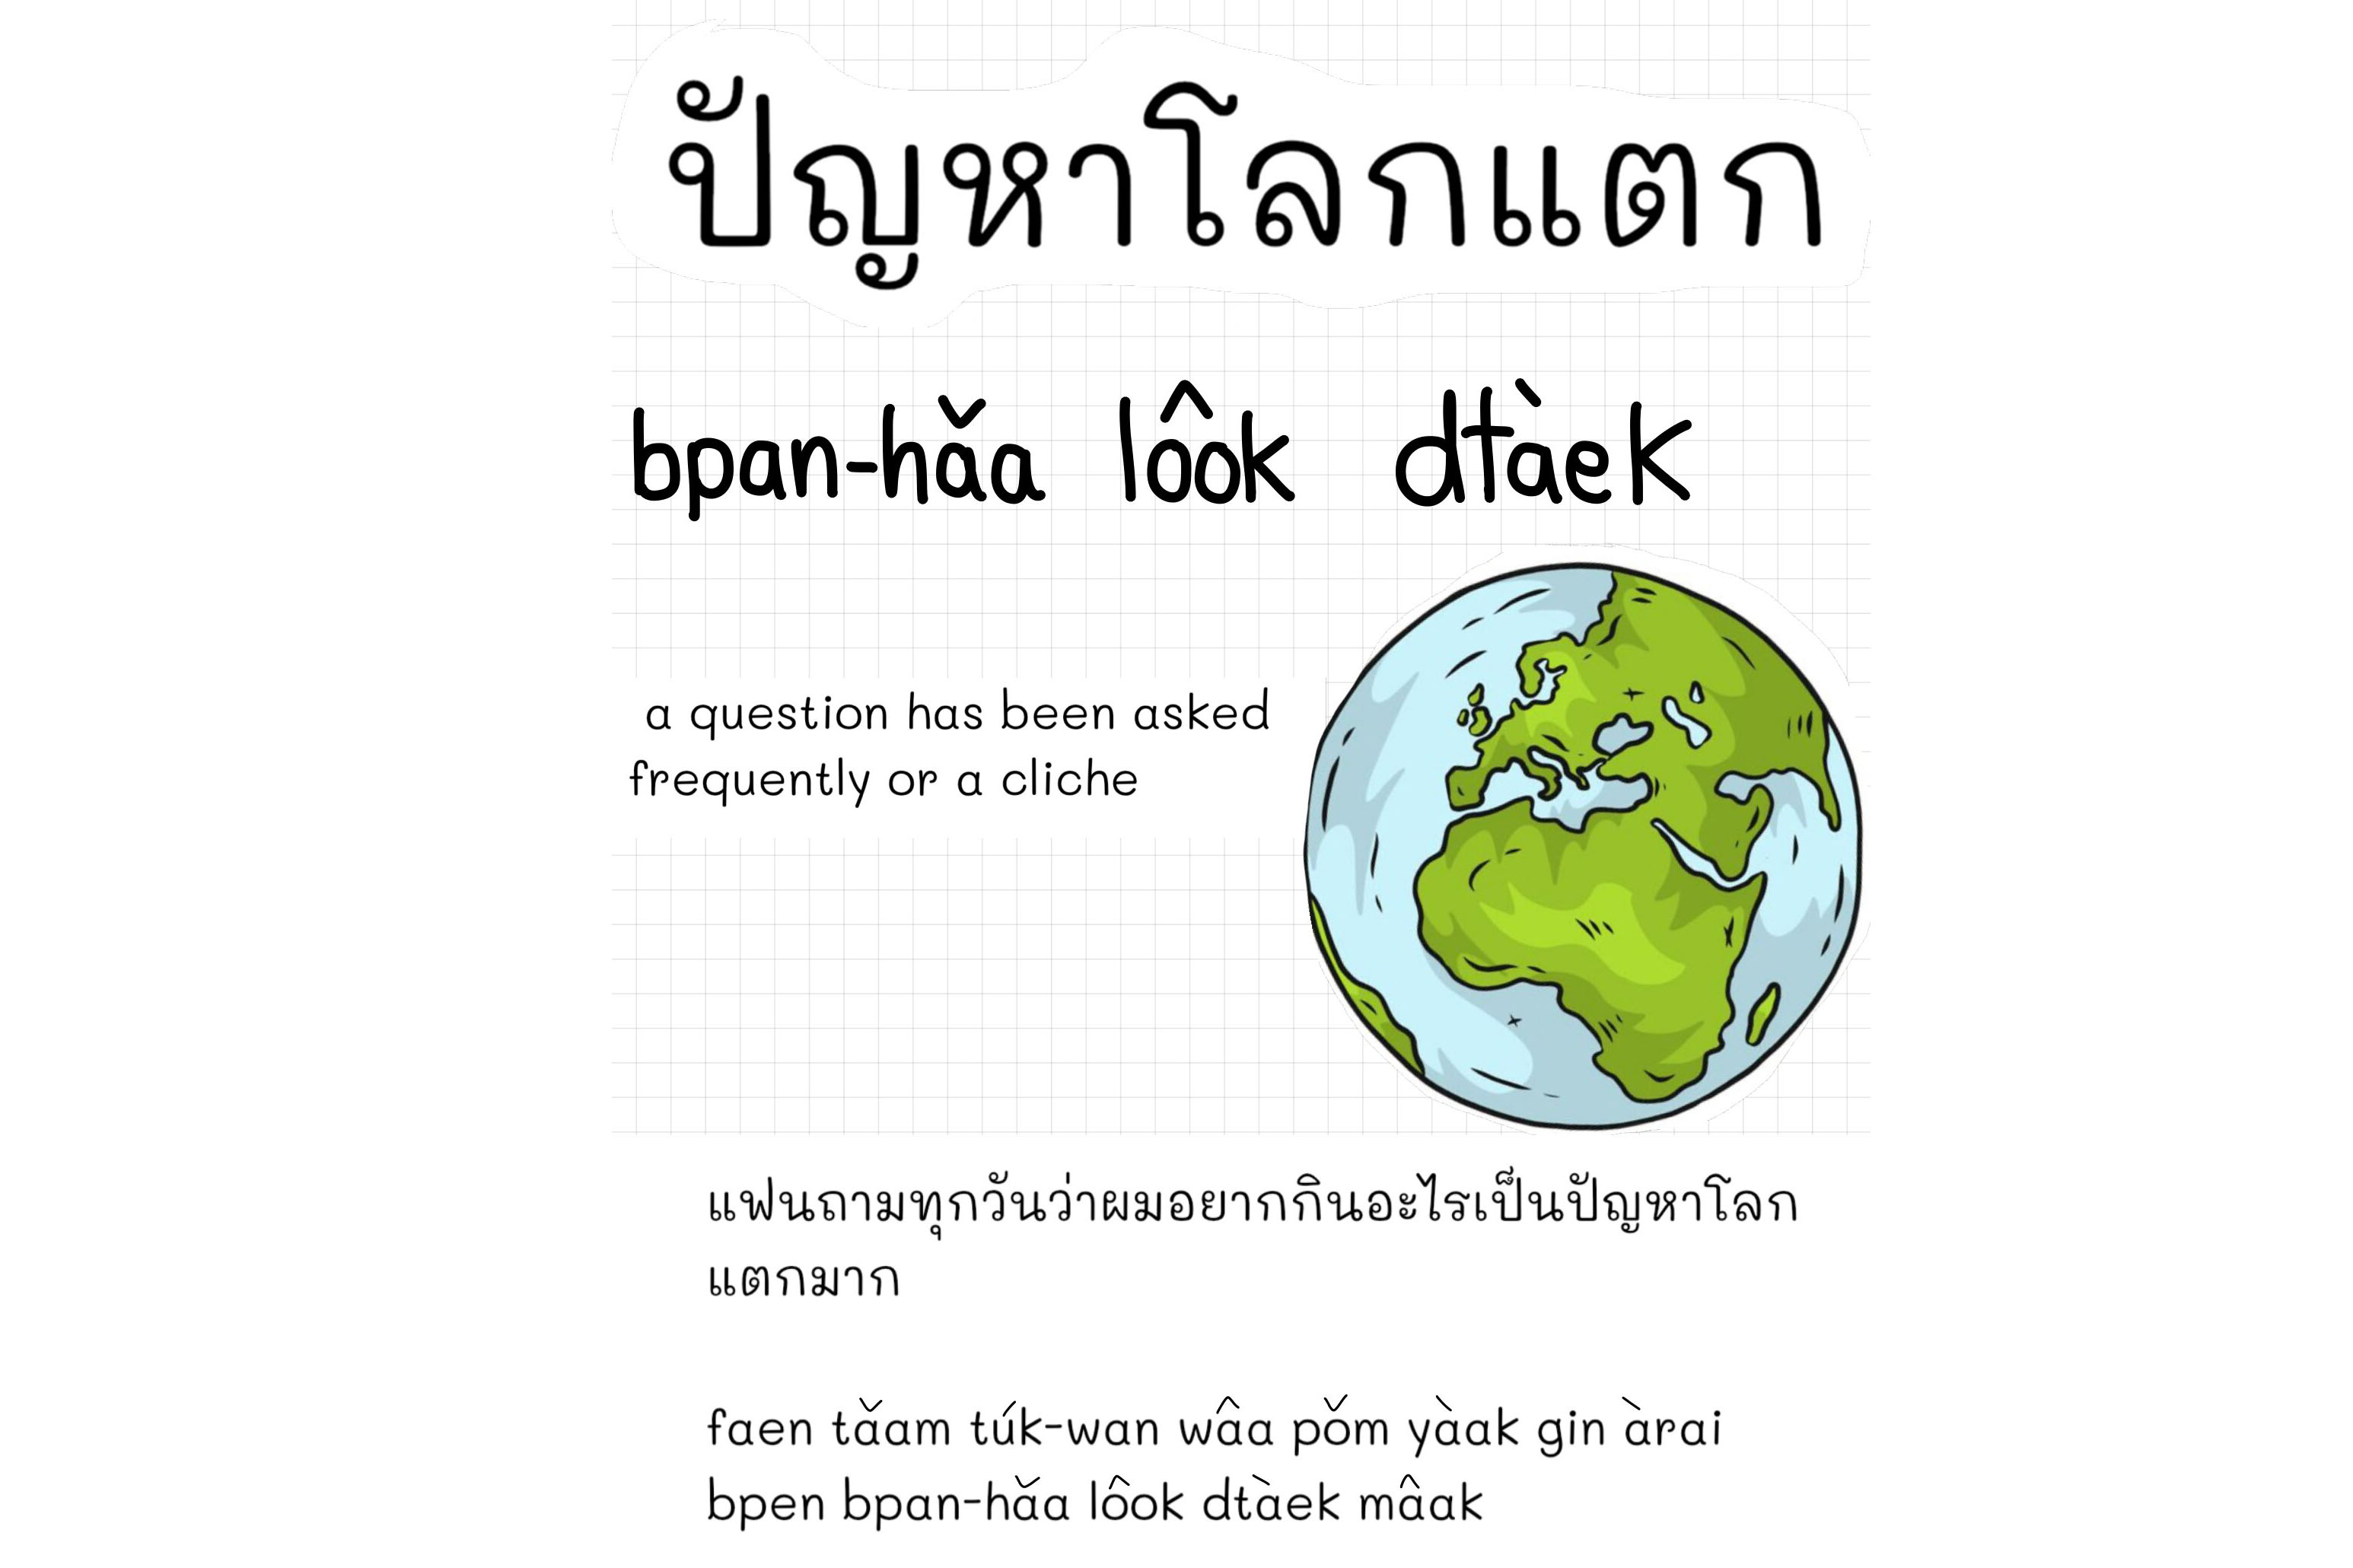 Our Guide to Thai Internet & Text Slang